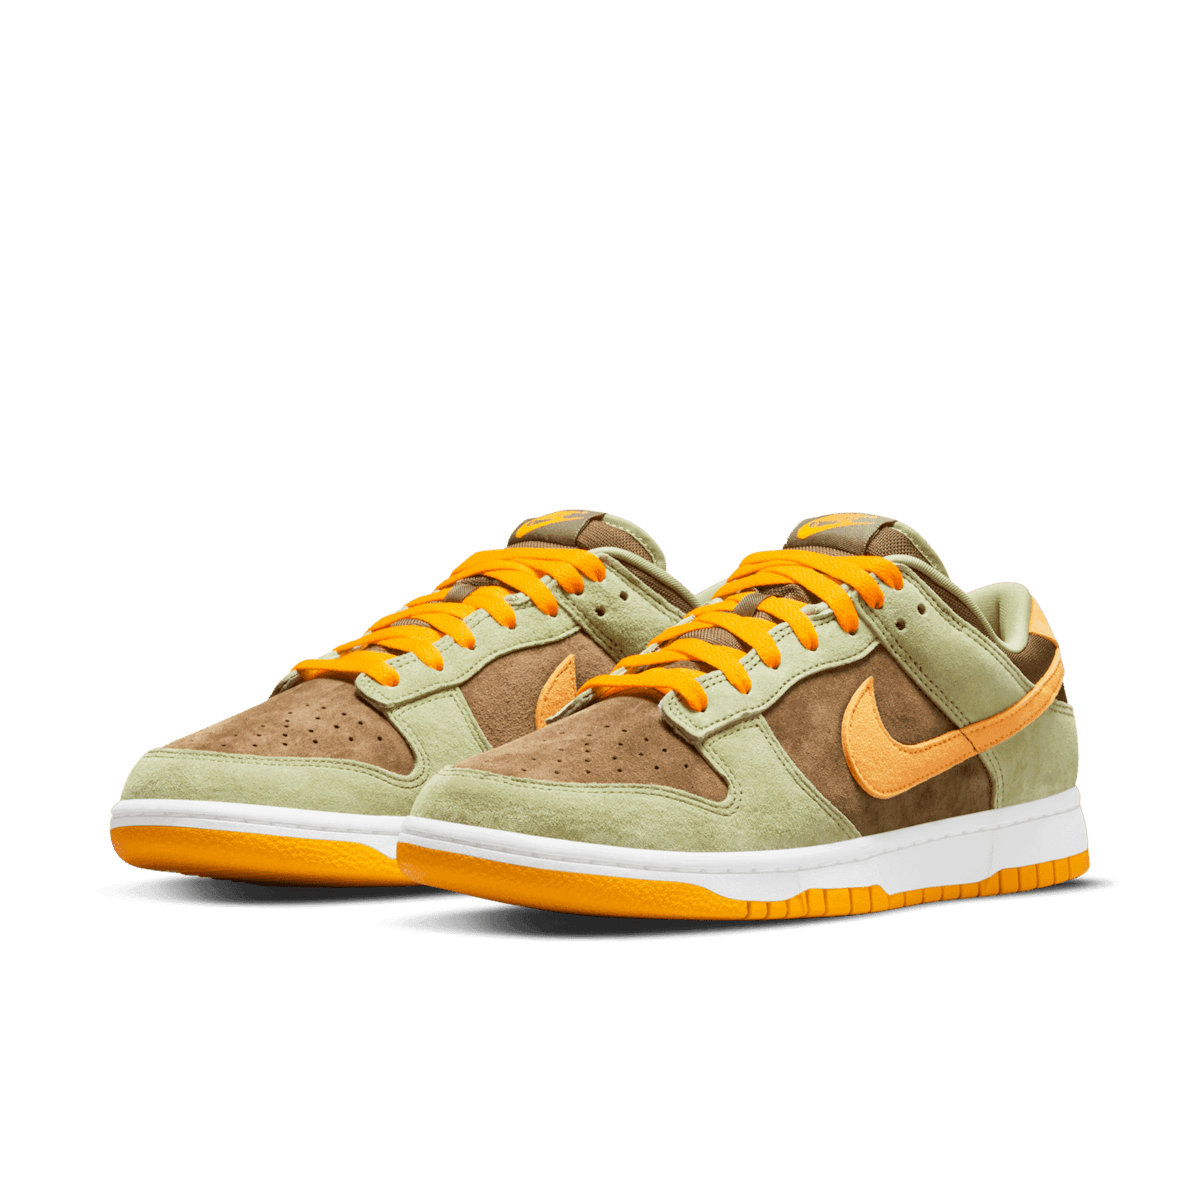 Low and Date DH5360-300 Dunk Nike Dusty - Raffles Release Olive